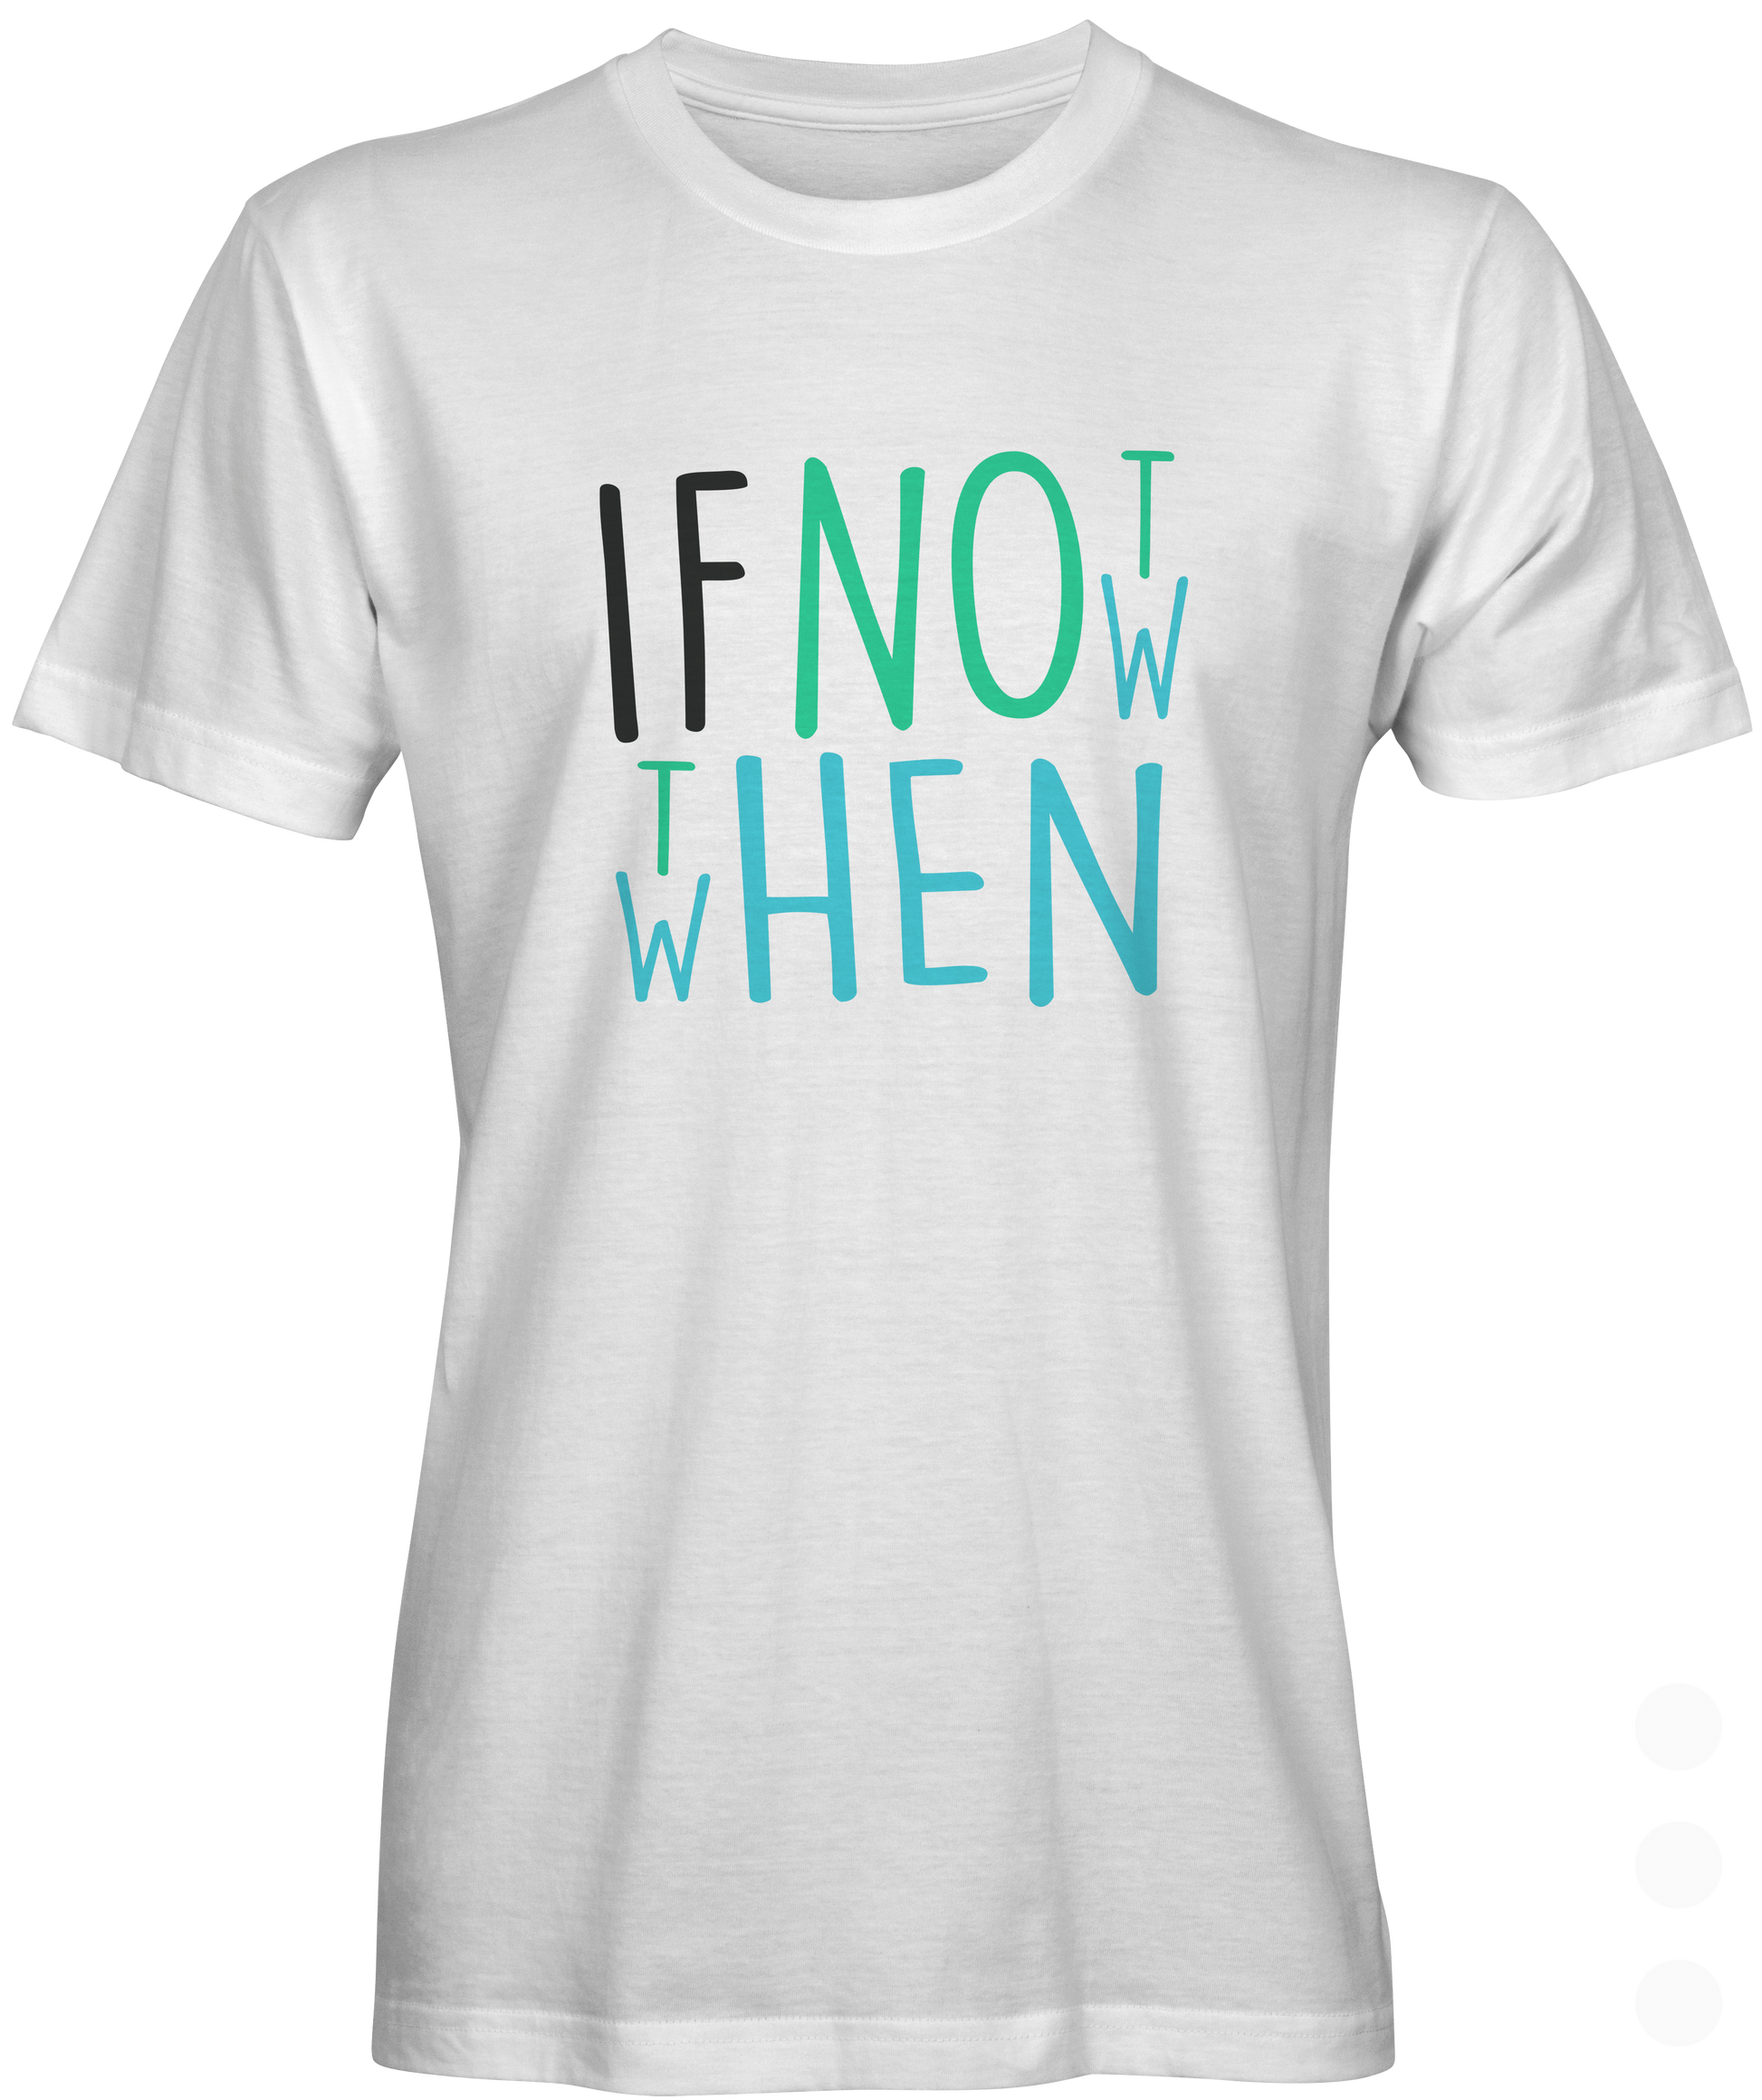  If Not Now then When T-shirt